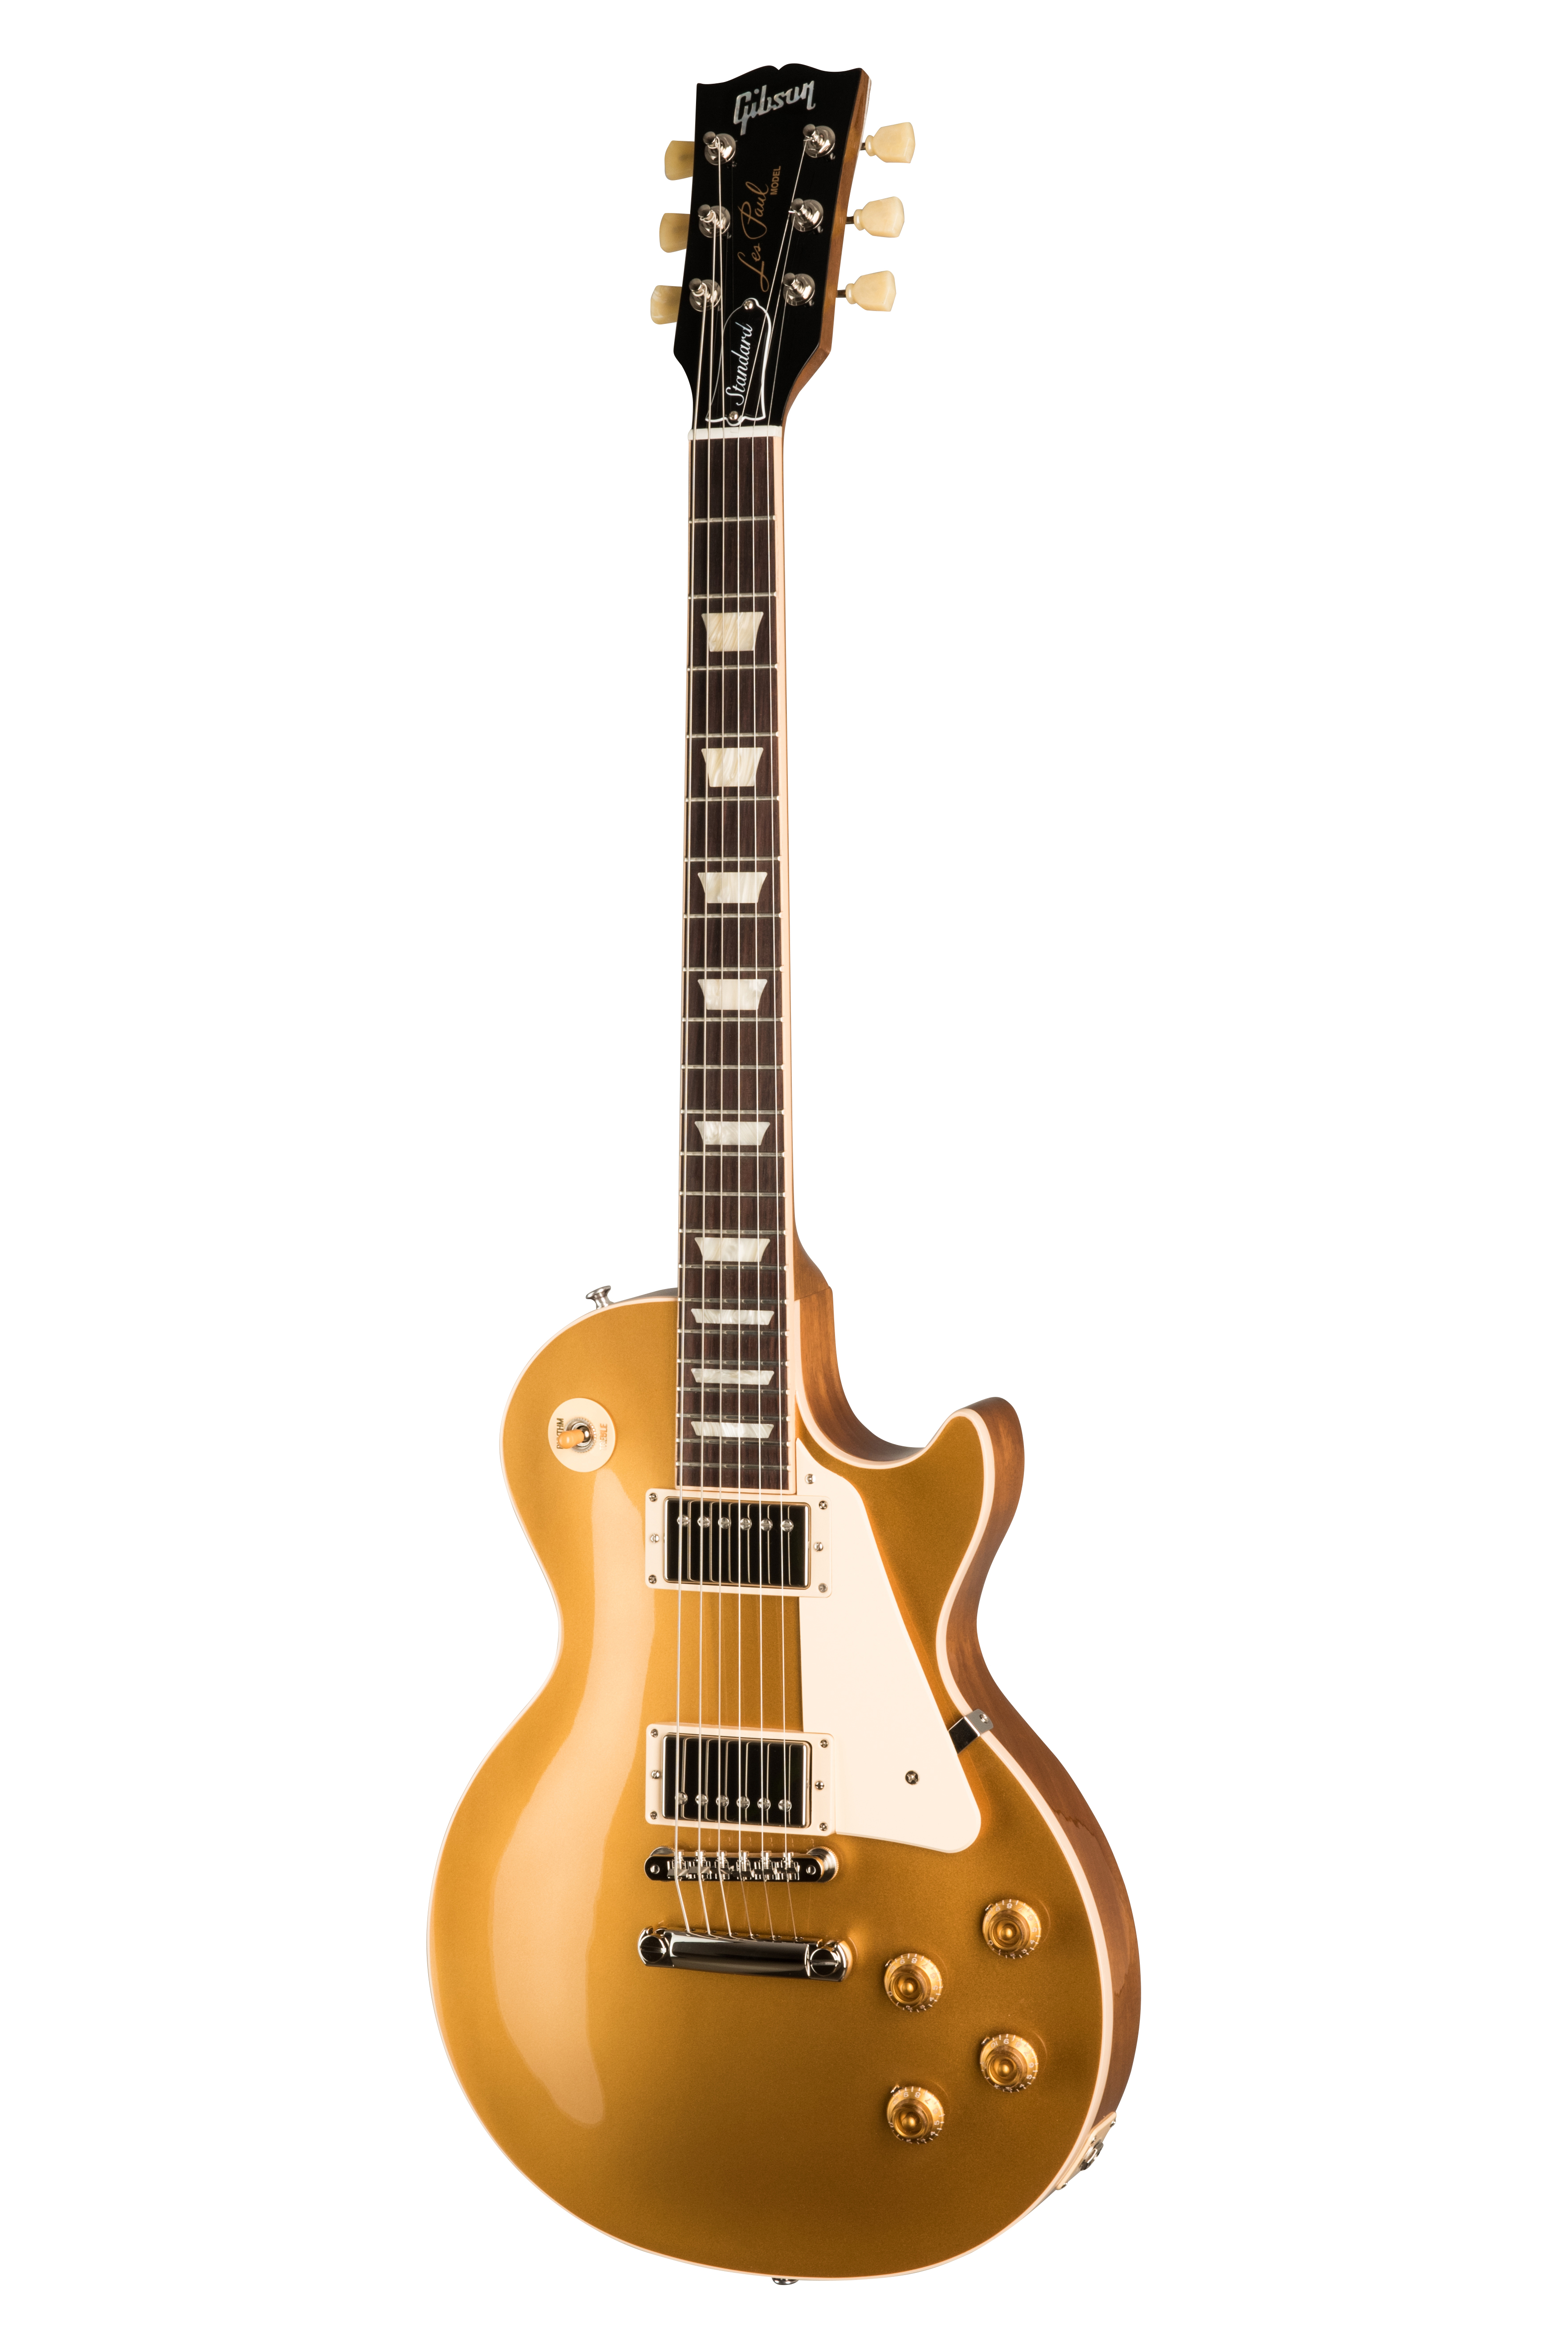 Maestro by Gibson Les Paul Standard ゴールド